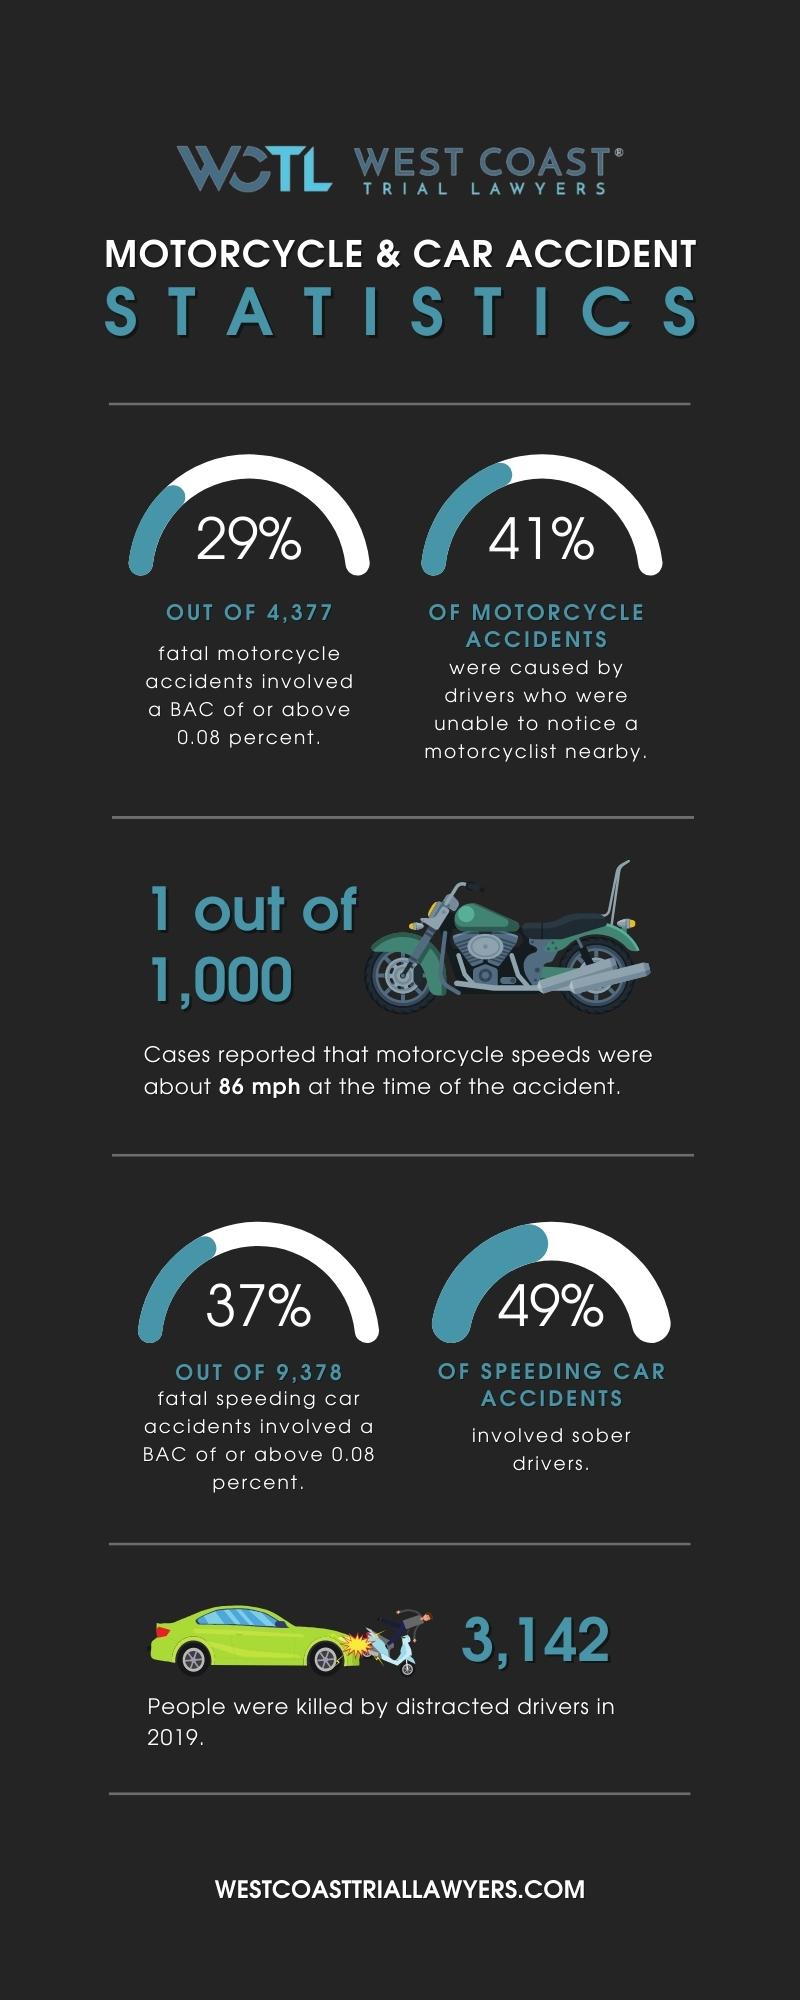 Motorcycle vs. car accident statistics infographic by West Coast Trial Lawyers